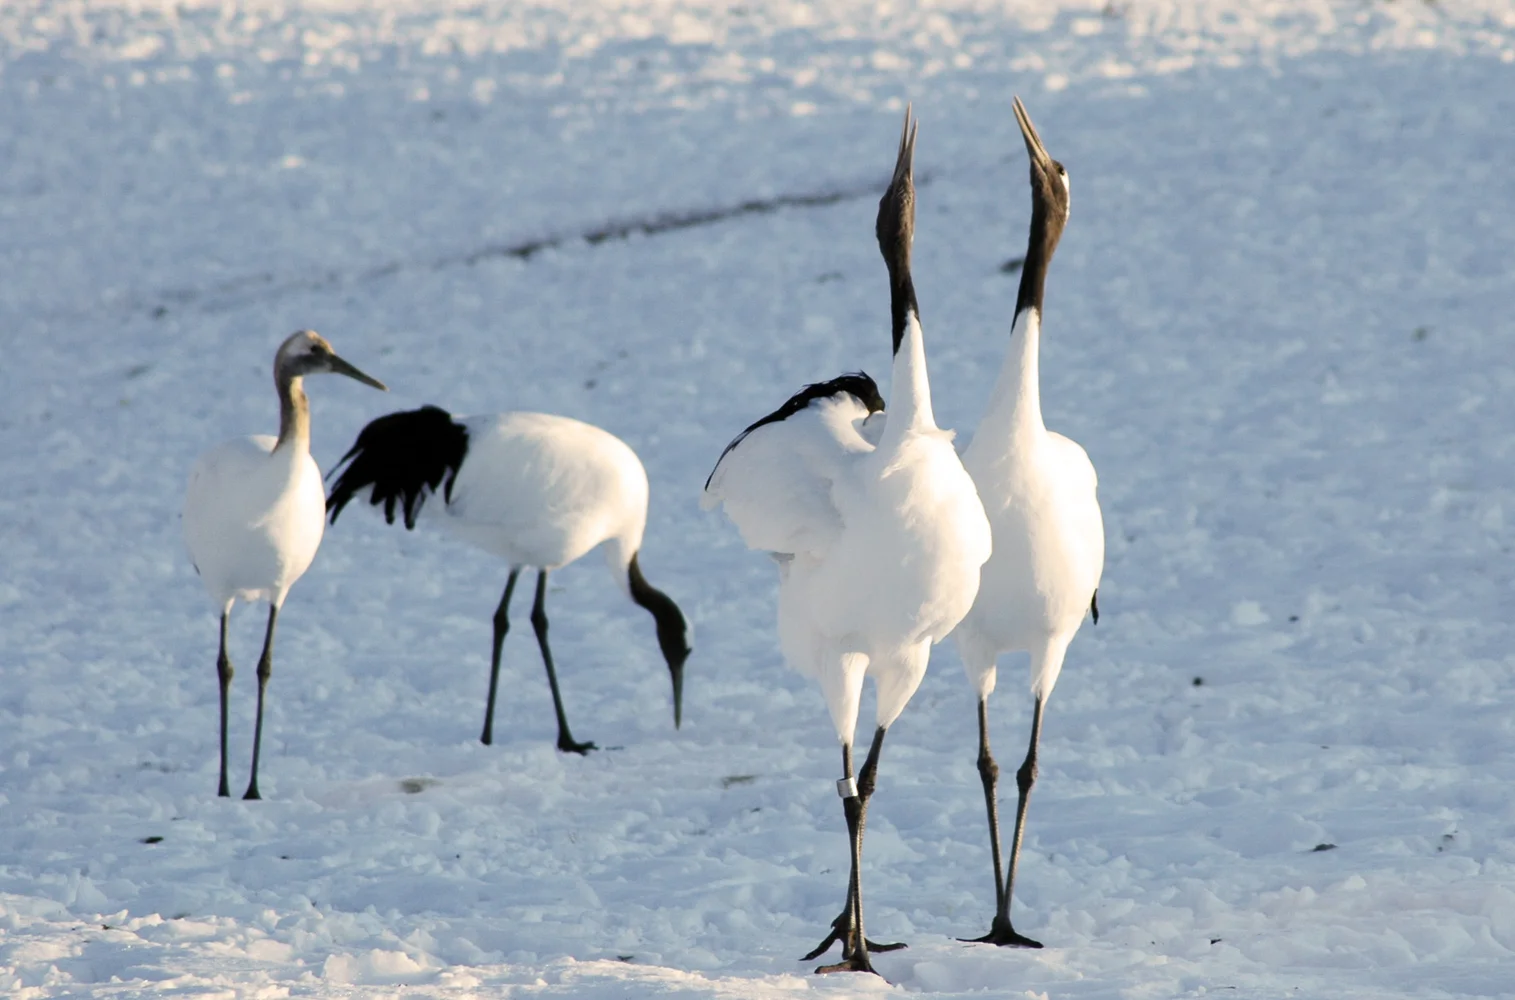 Japanese red-crowned crane observation tour in Hokkaido!